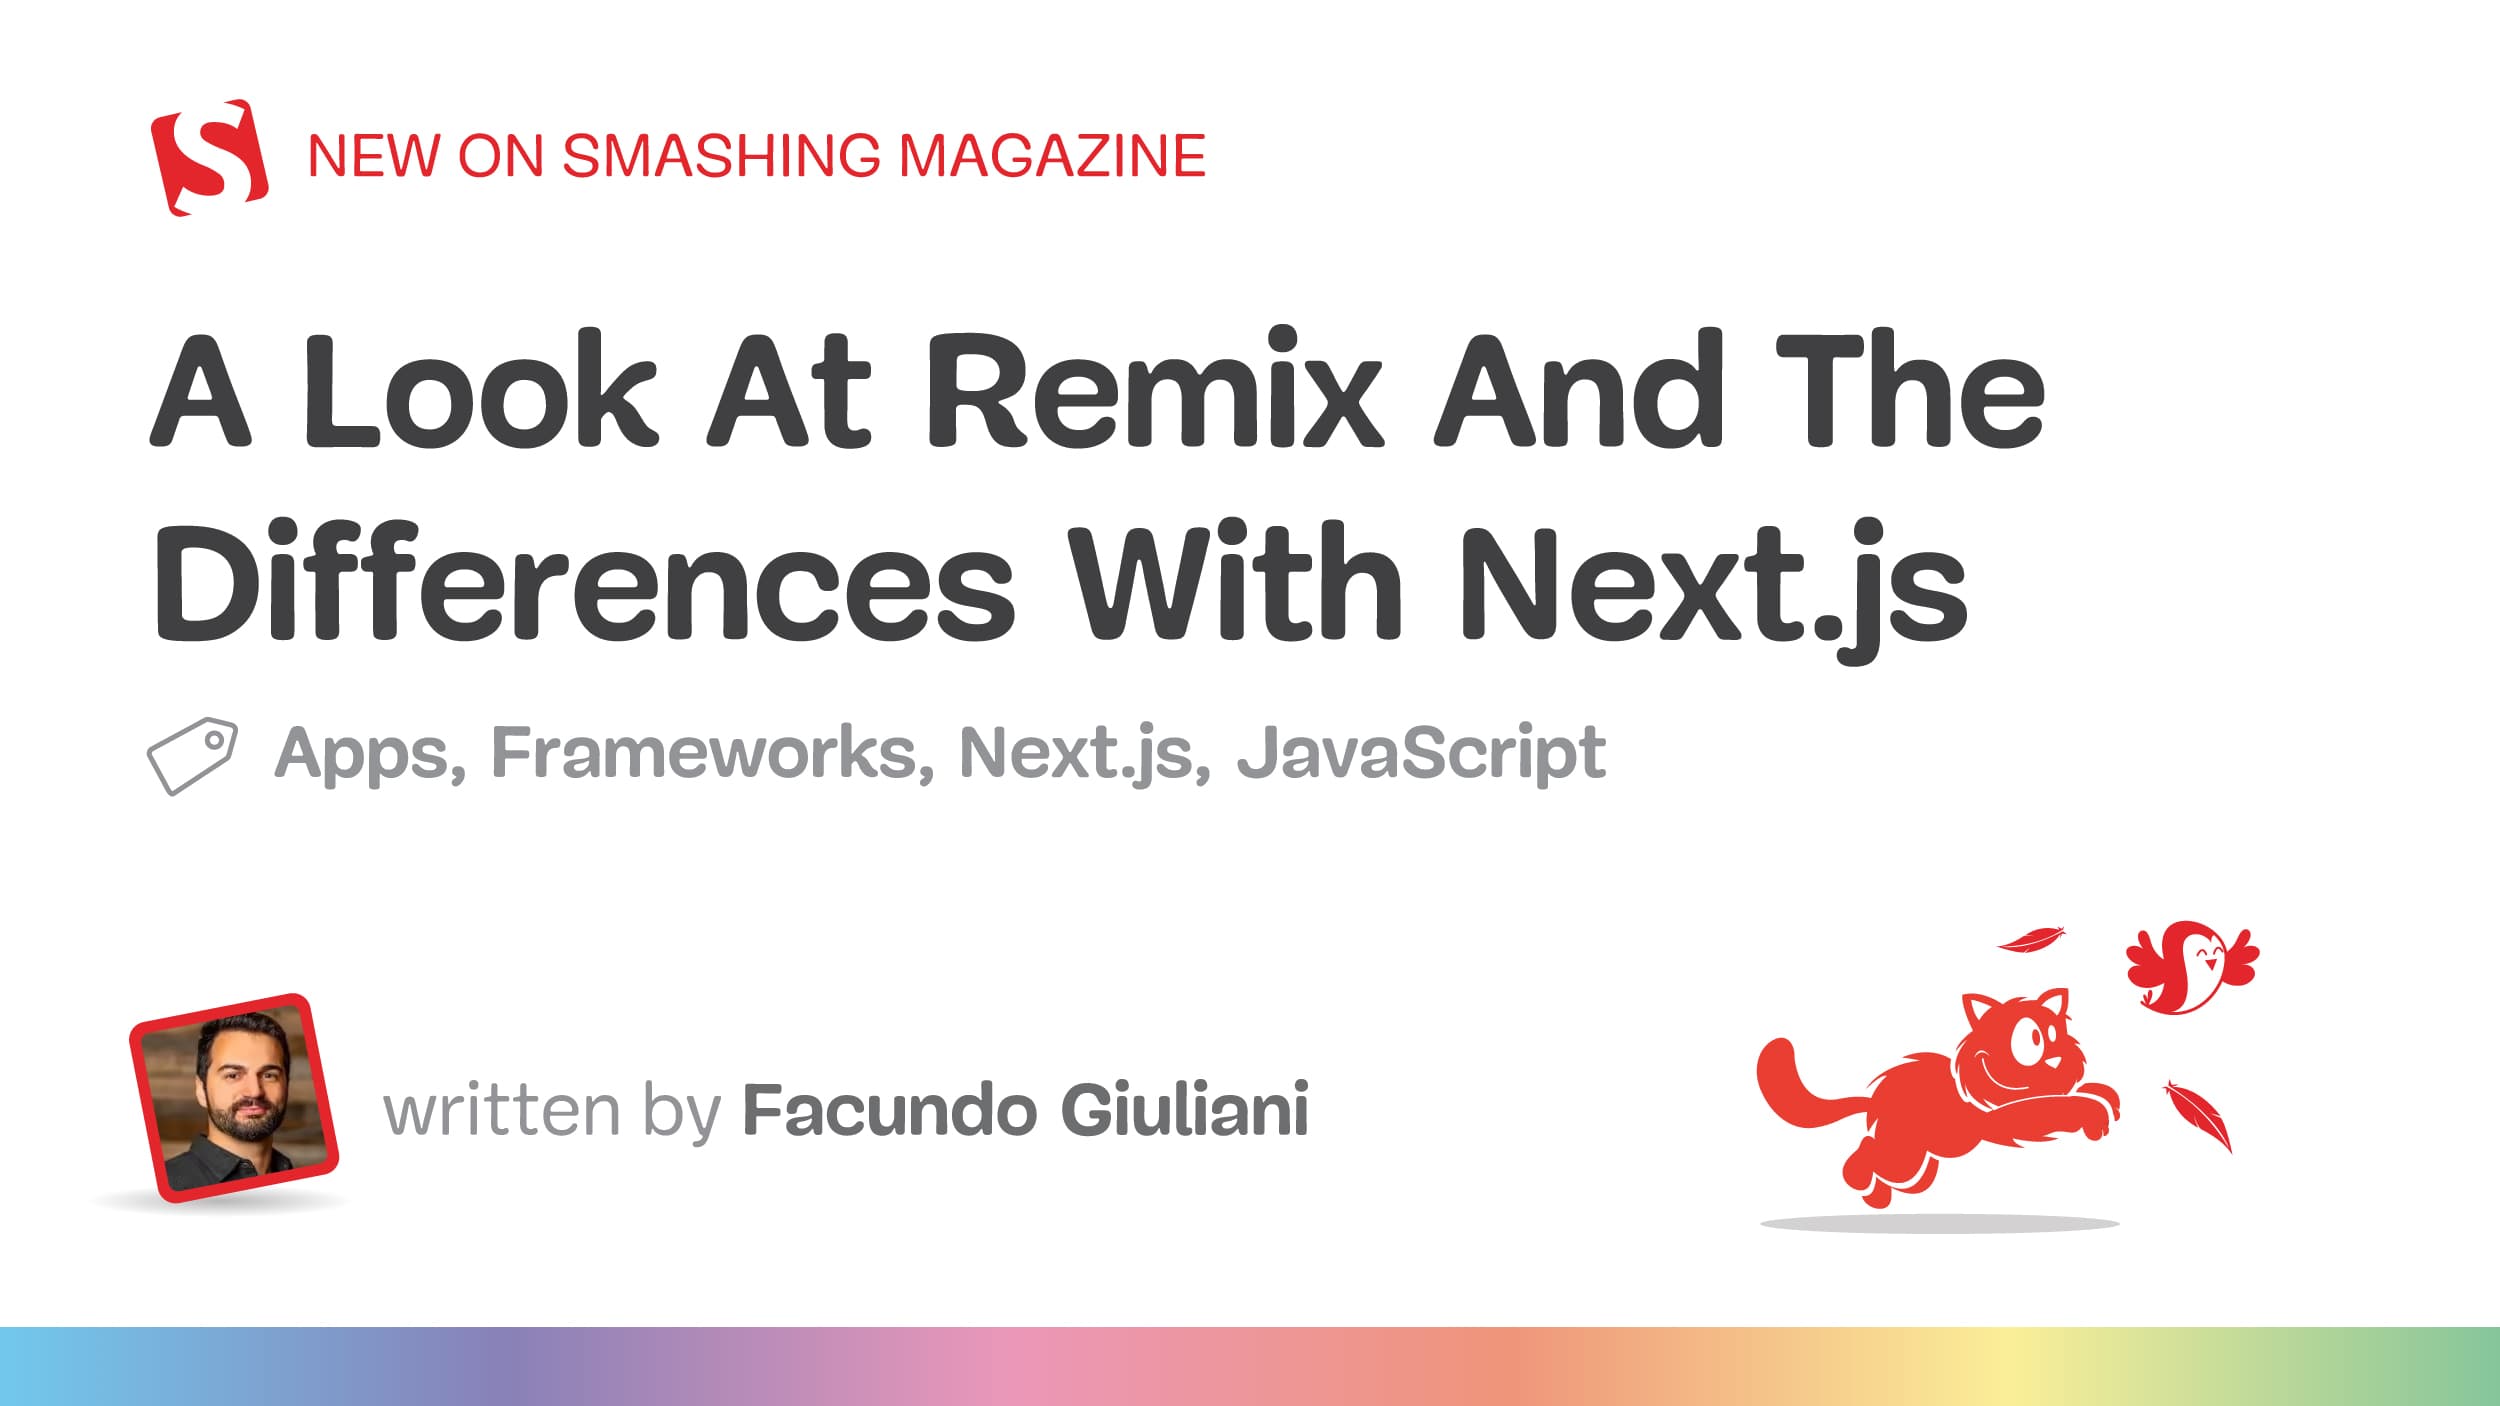 A Look At Remix And The Differences With Next.js